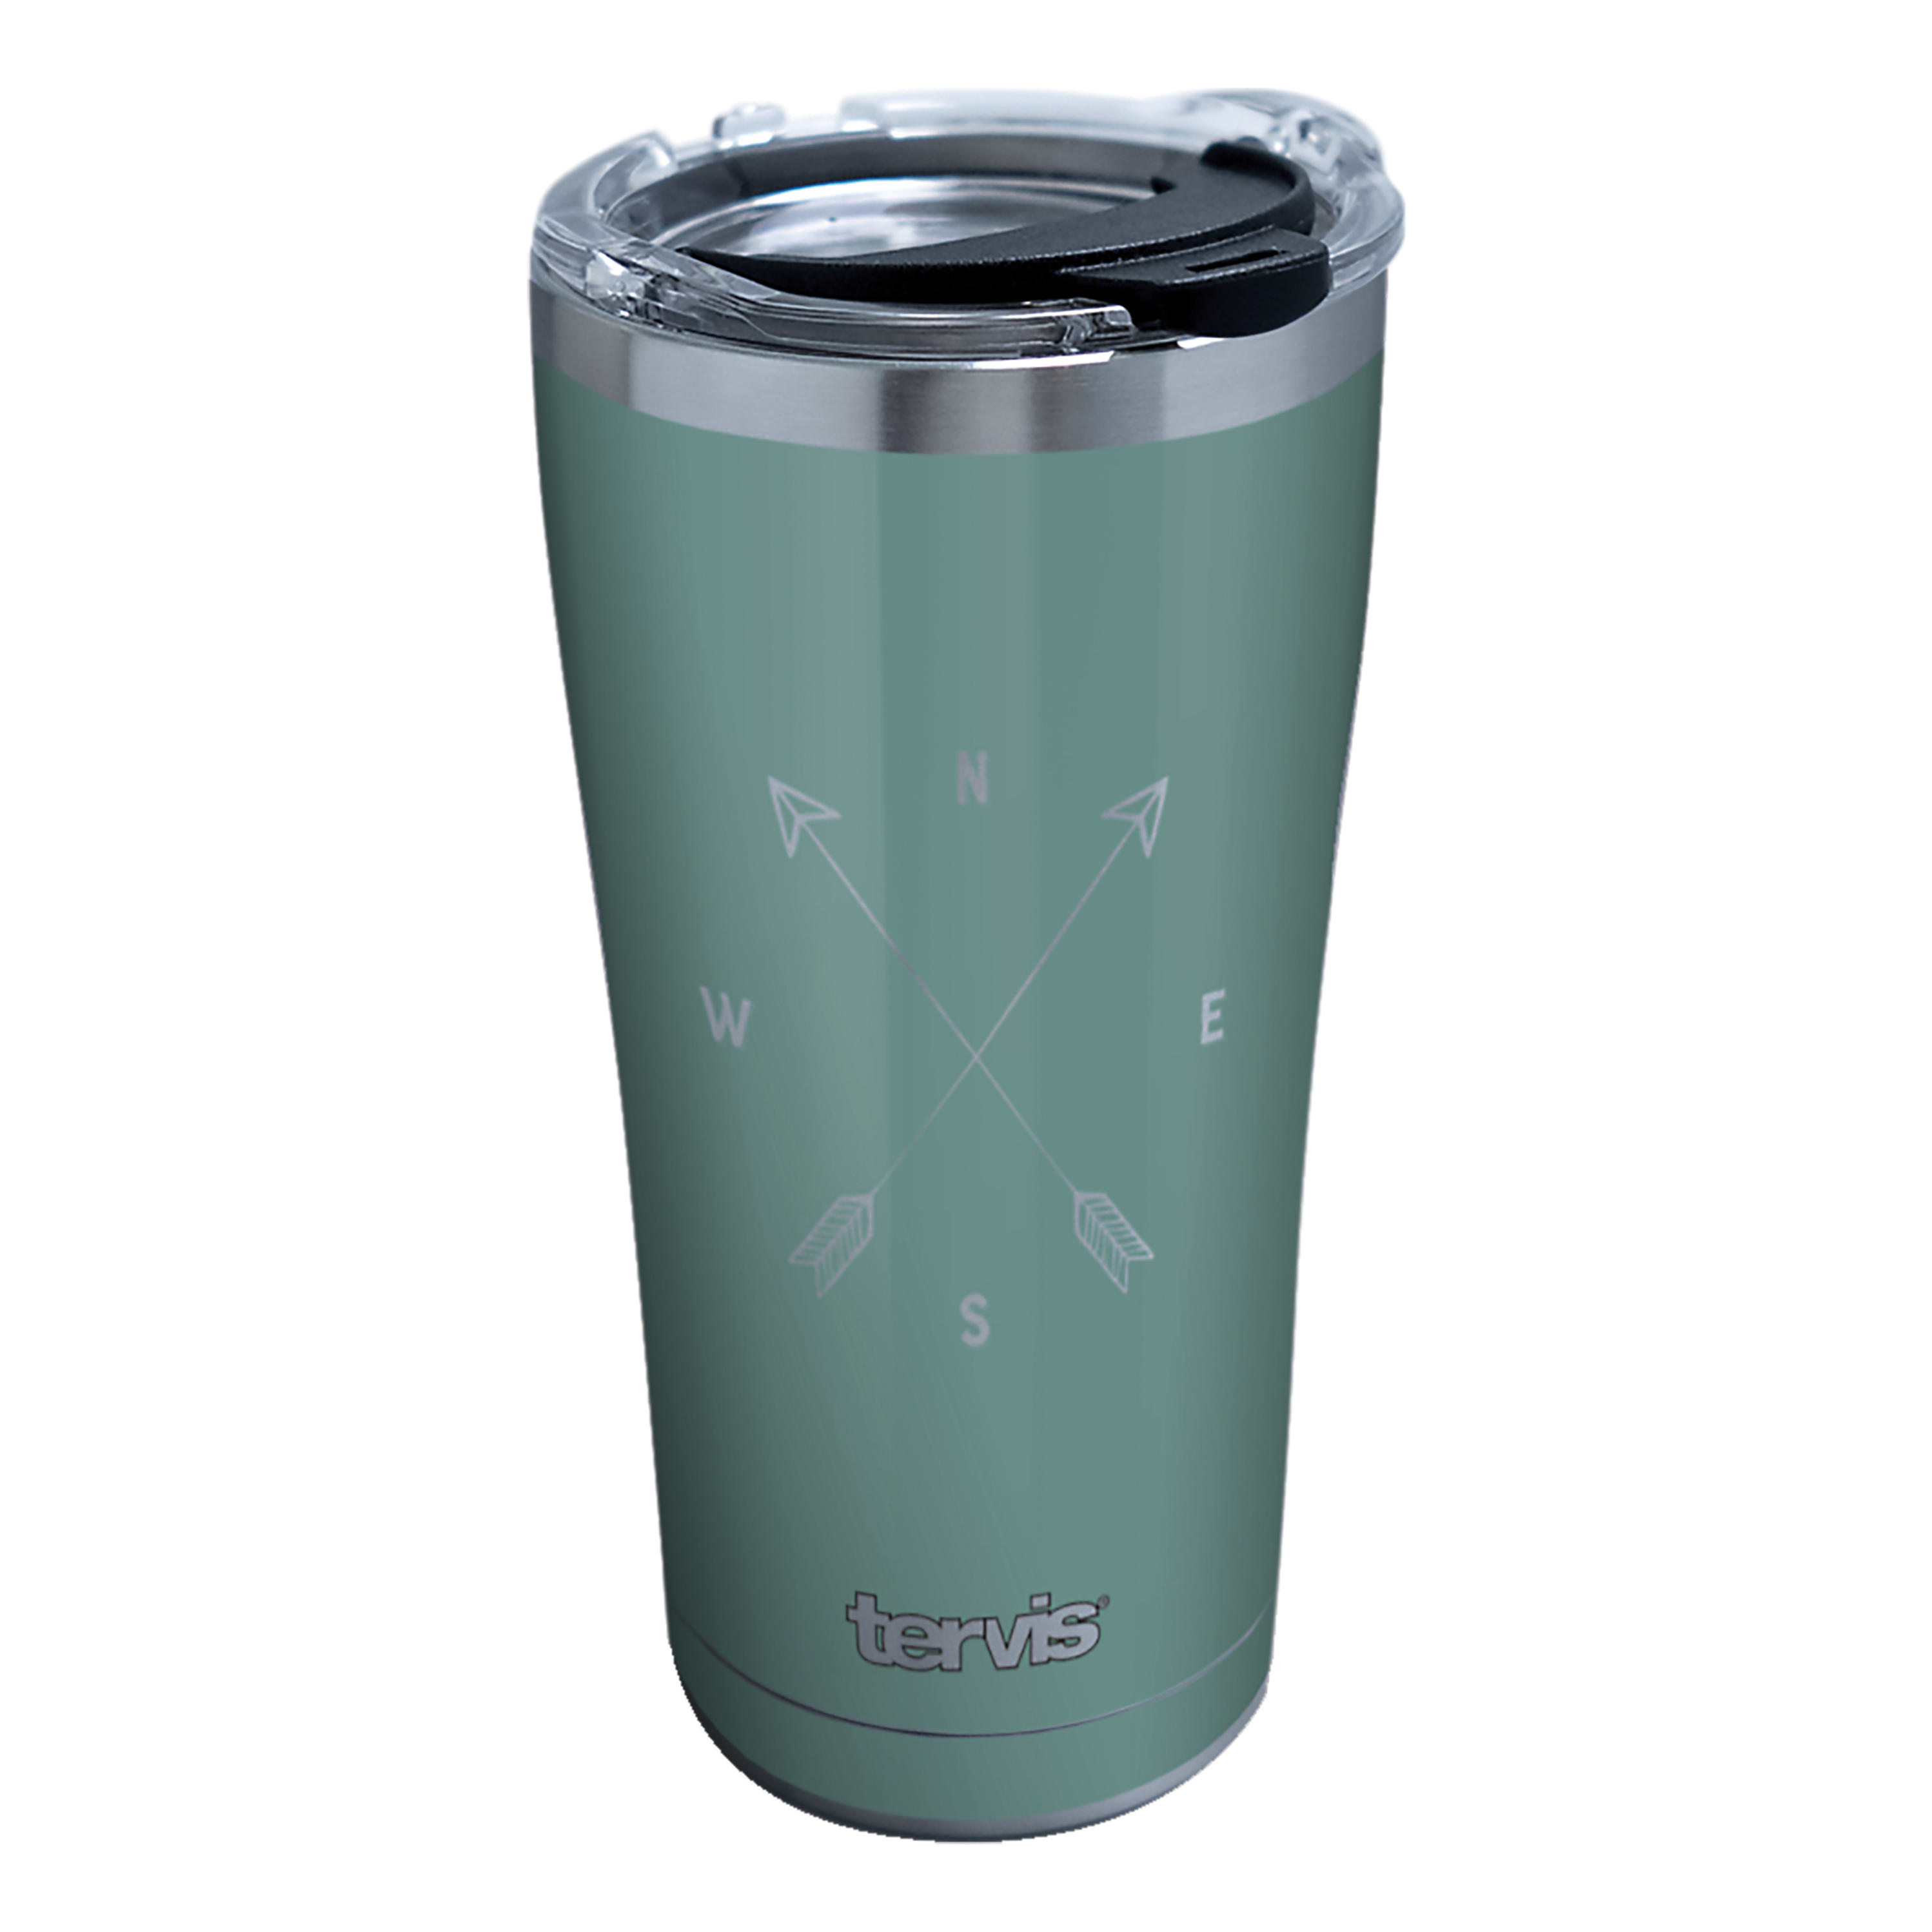 Tervis 20 oz. Stainless Steel Tumblers - Simple Compass